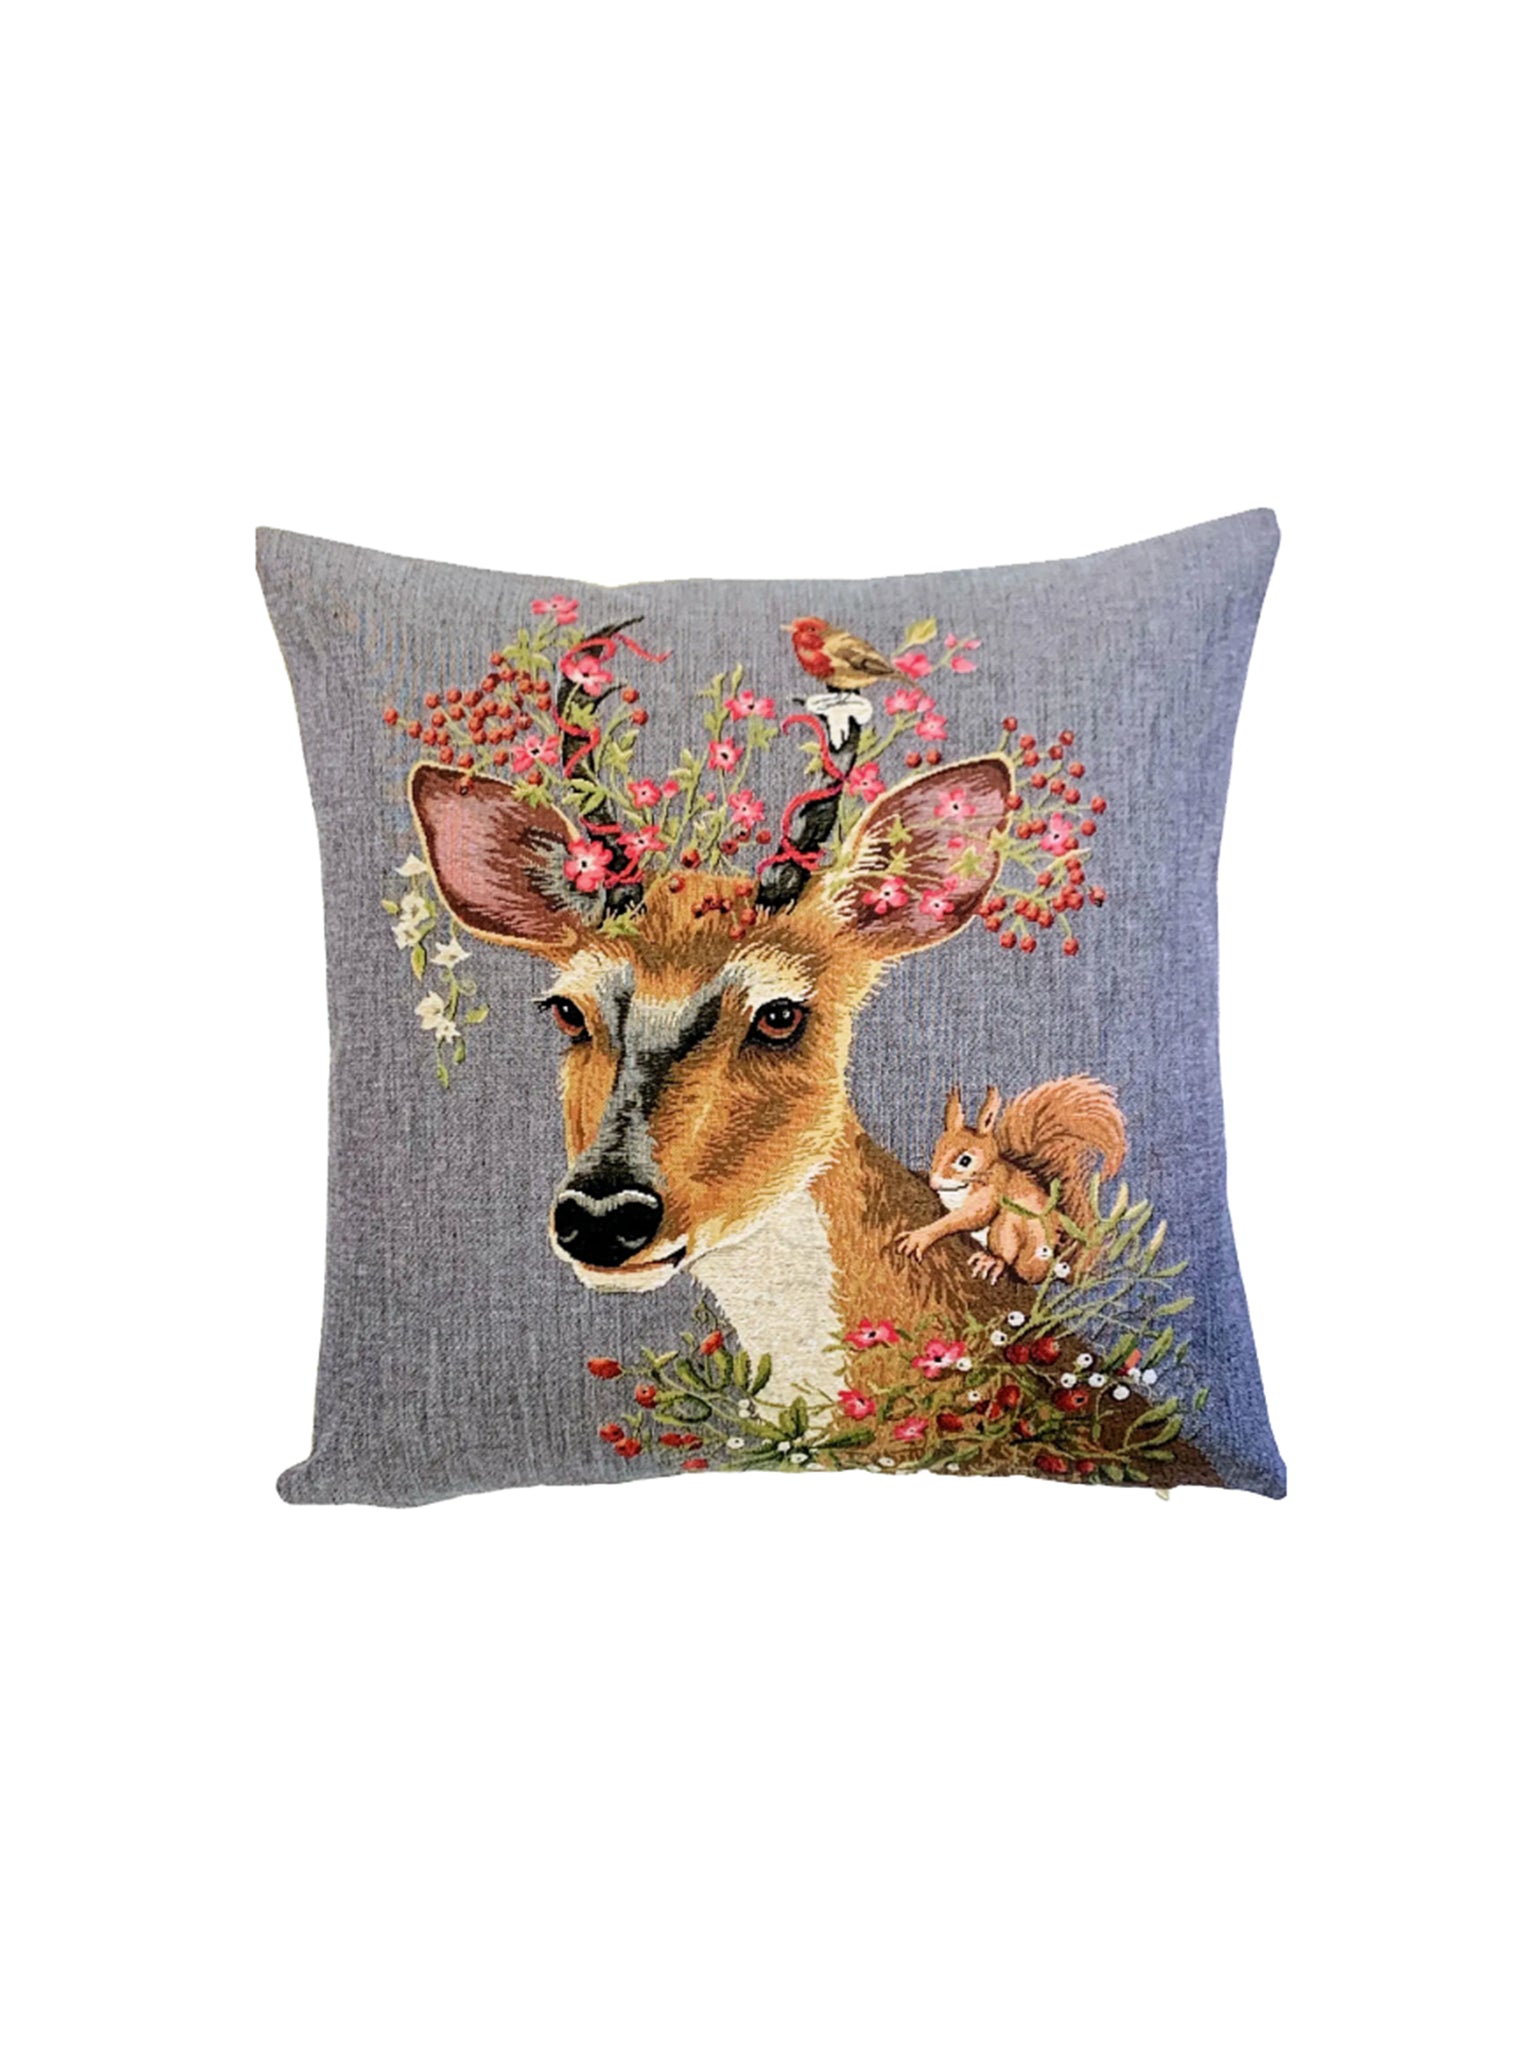 Woodland Deer and Squirrel Pillow